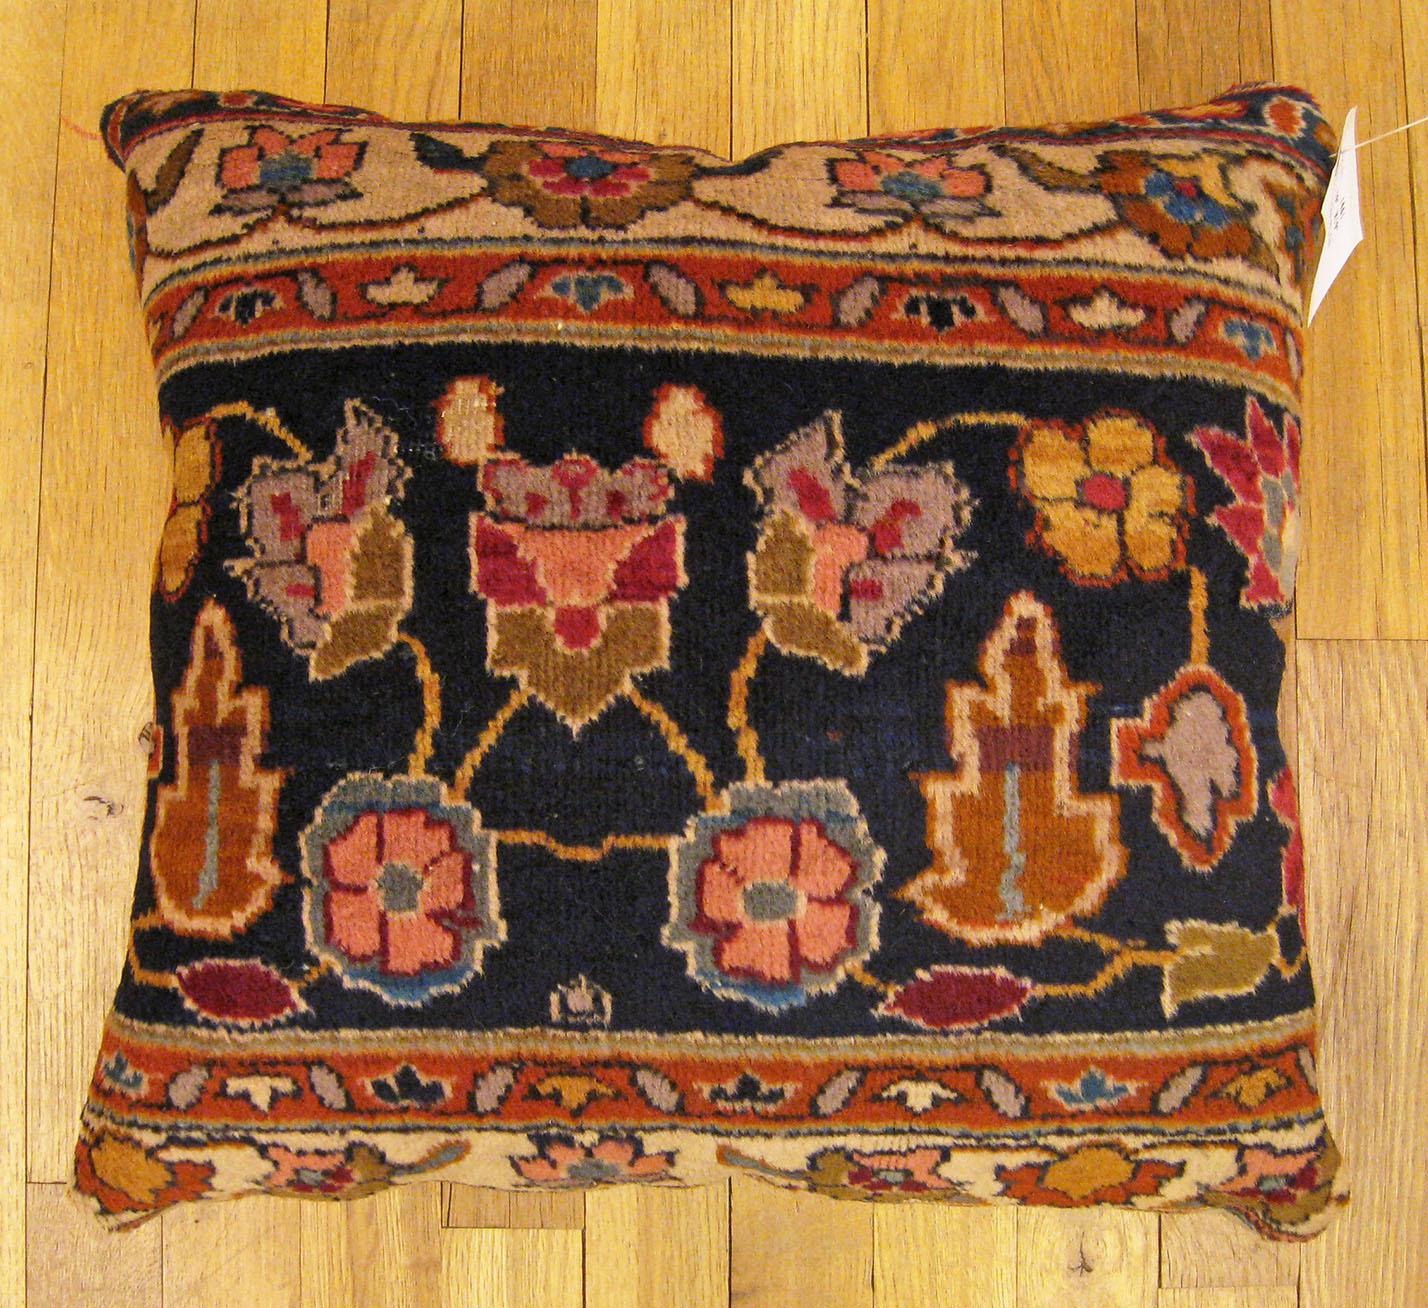 Antique Indian Agra rug pillow; size 1'5” x 1'5”.

An antique decorative pillow with floral elements allover a blue central field, size 1'5” x 1'5”. This lovely decorative pillow features an antique fabric of a Agra rug on front which is